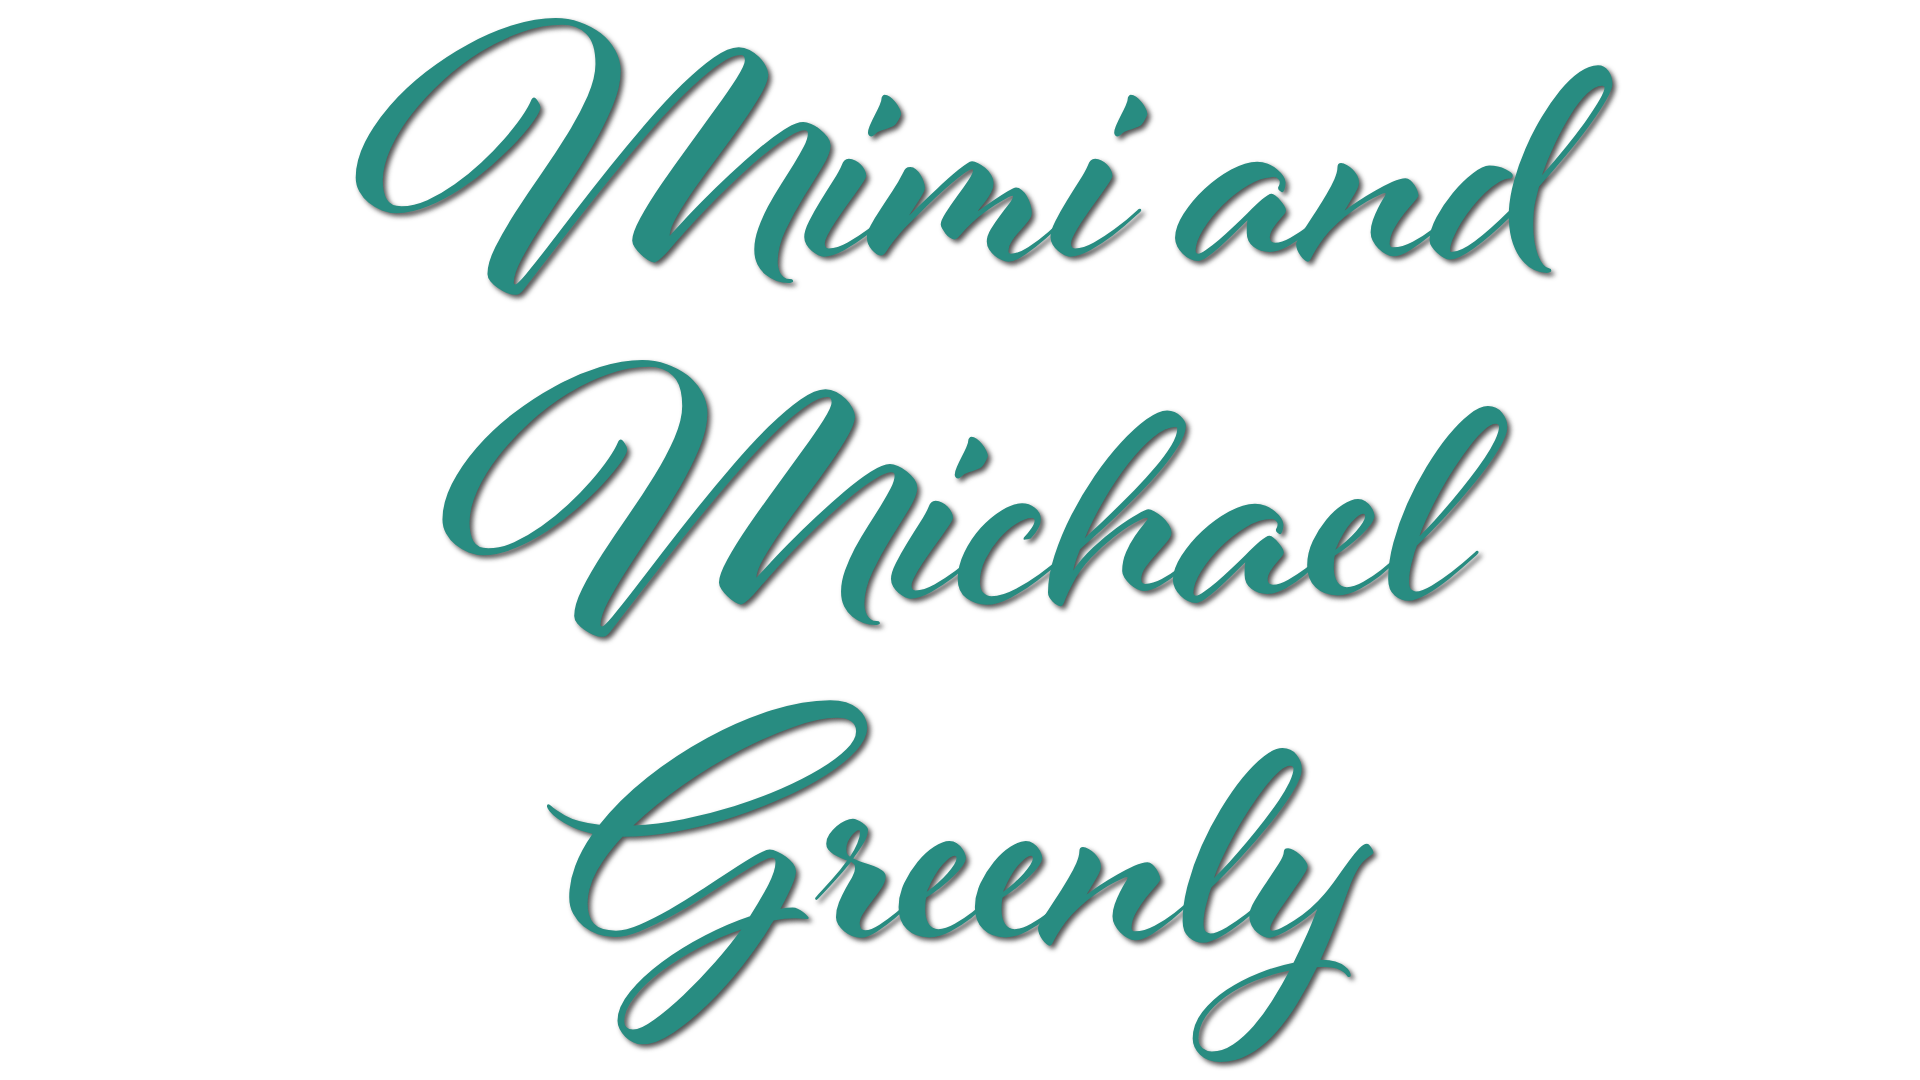 Defender of Youth - Mimi and Michael Greenly